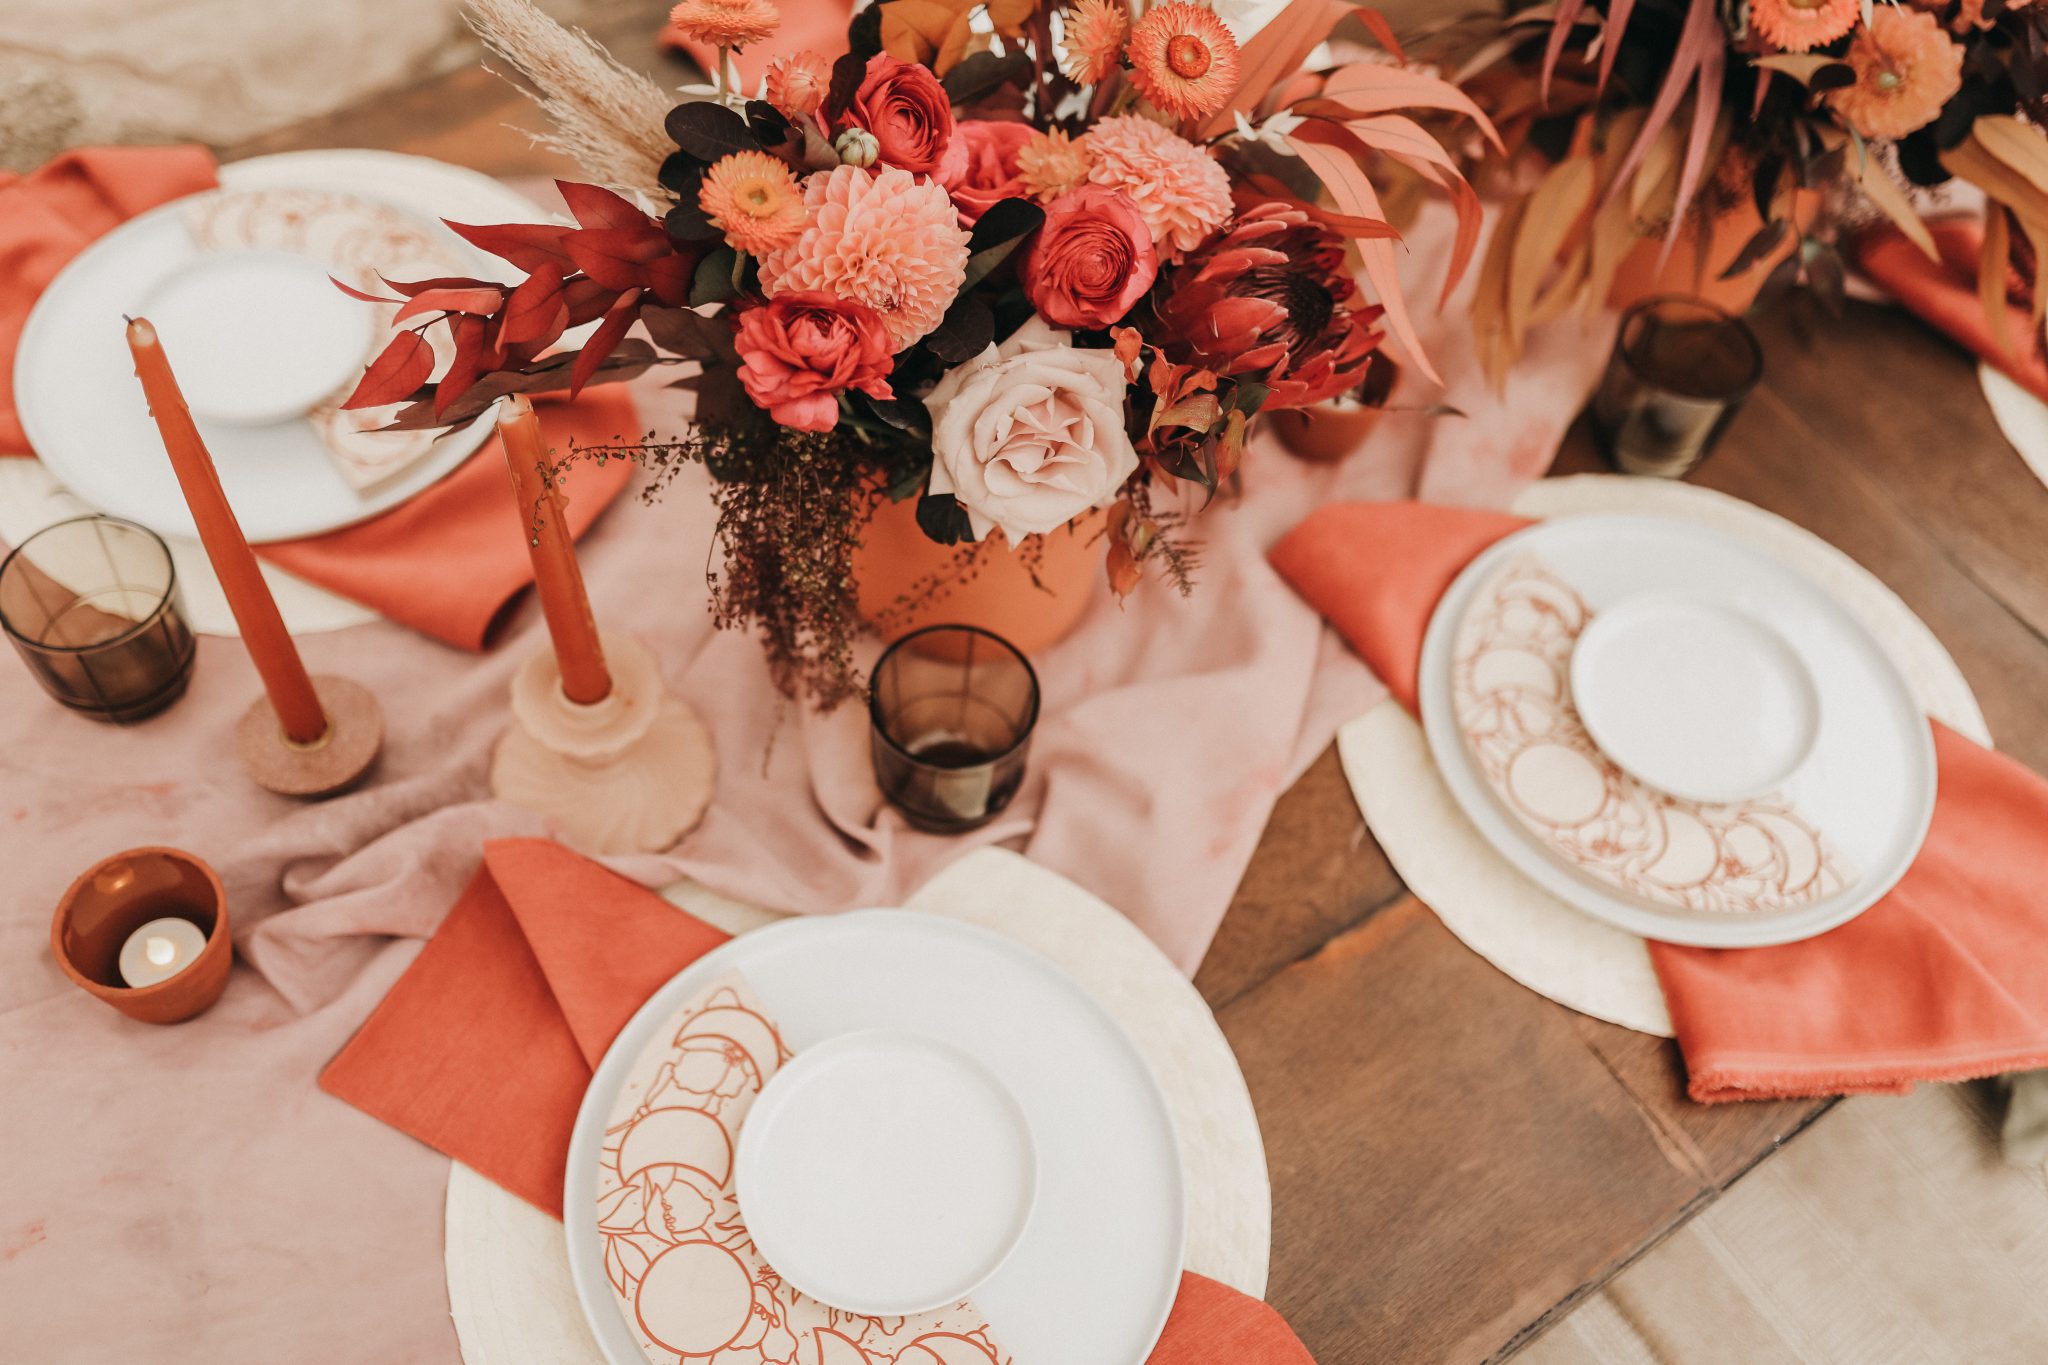 Moroccan elopement inspiration tablescape with moon cycle stationery and terracotta accents